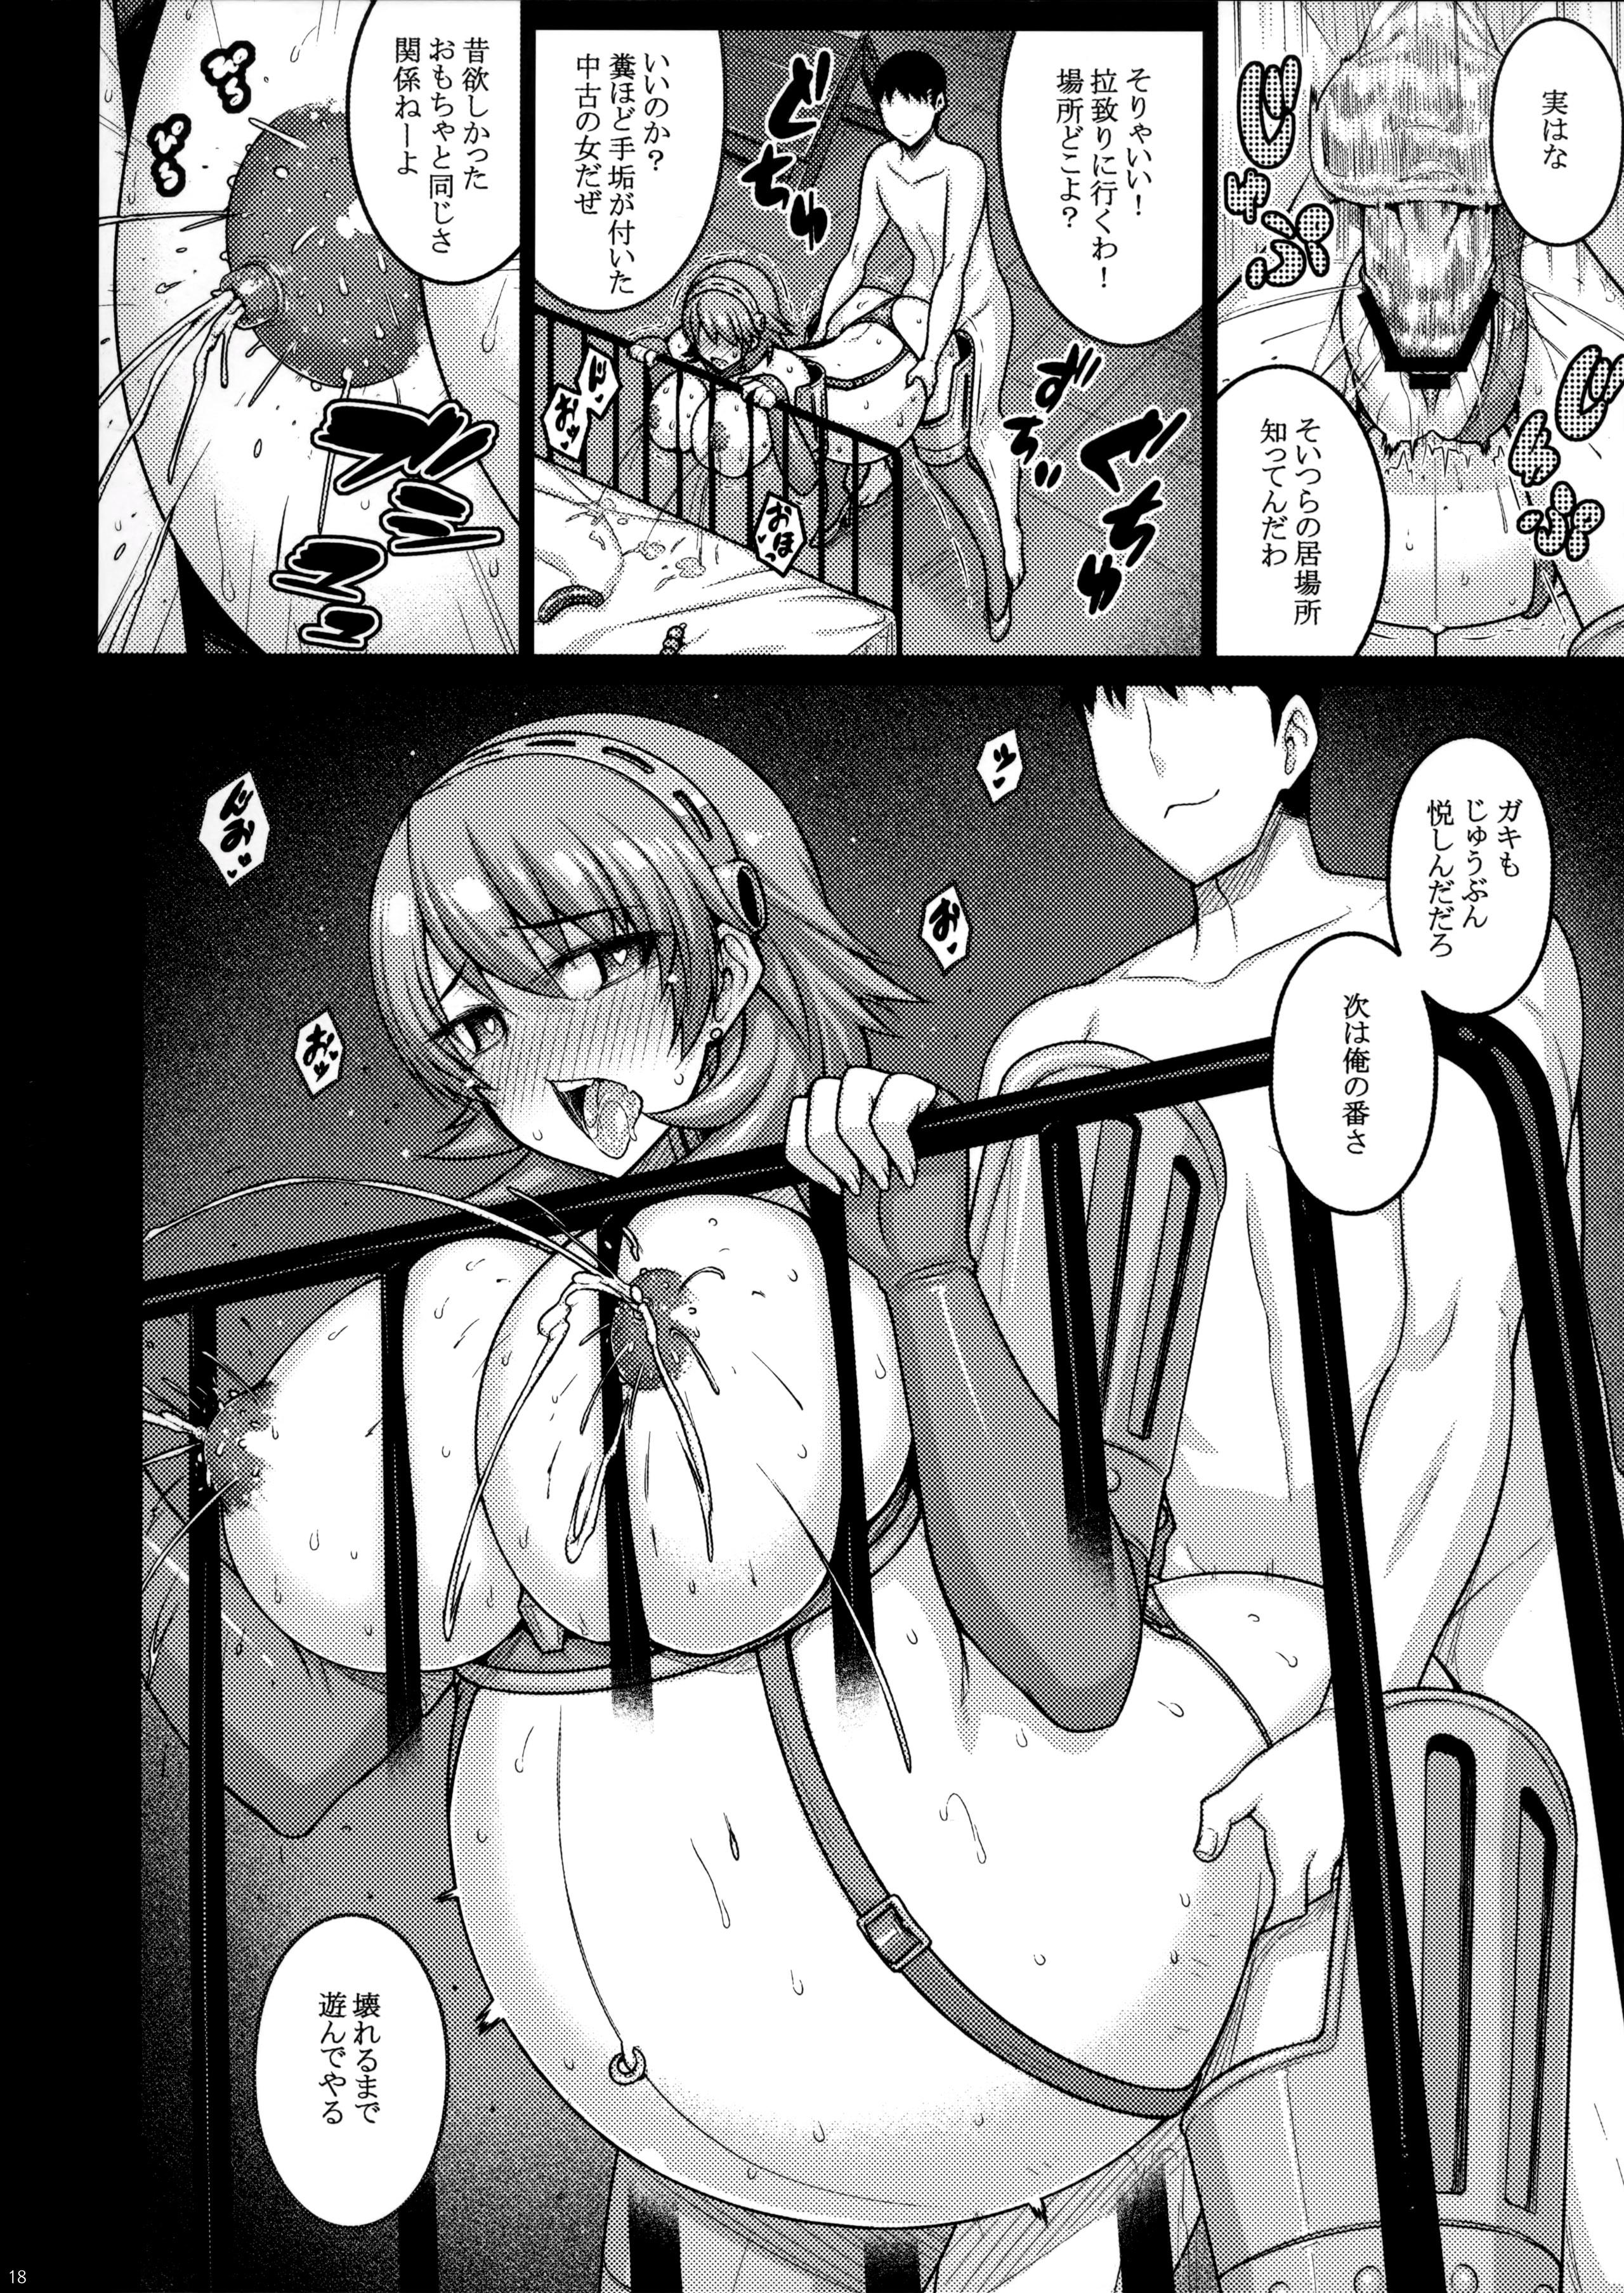 4some Raw - Persona 3 Chubby - Page 17